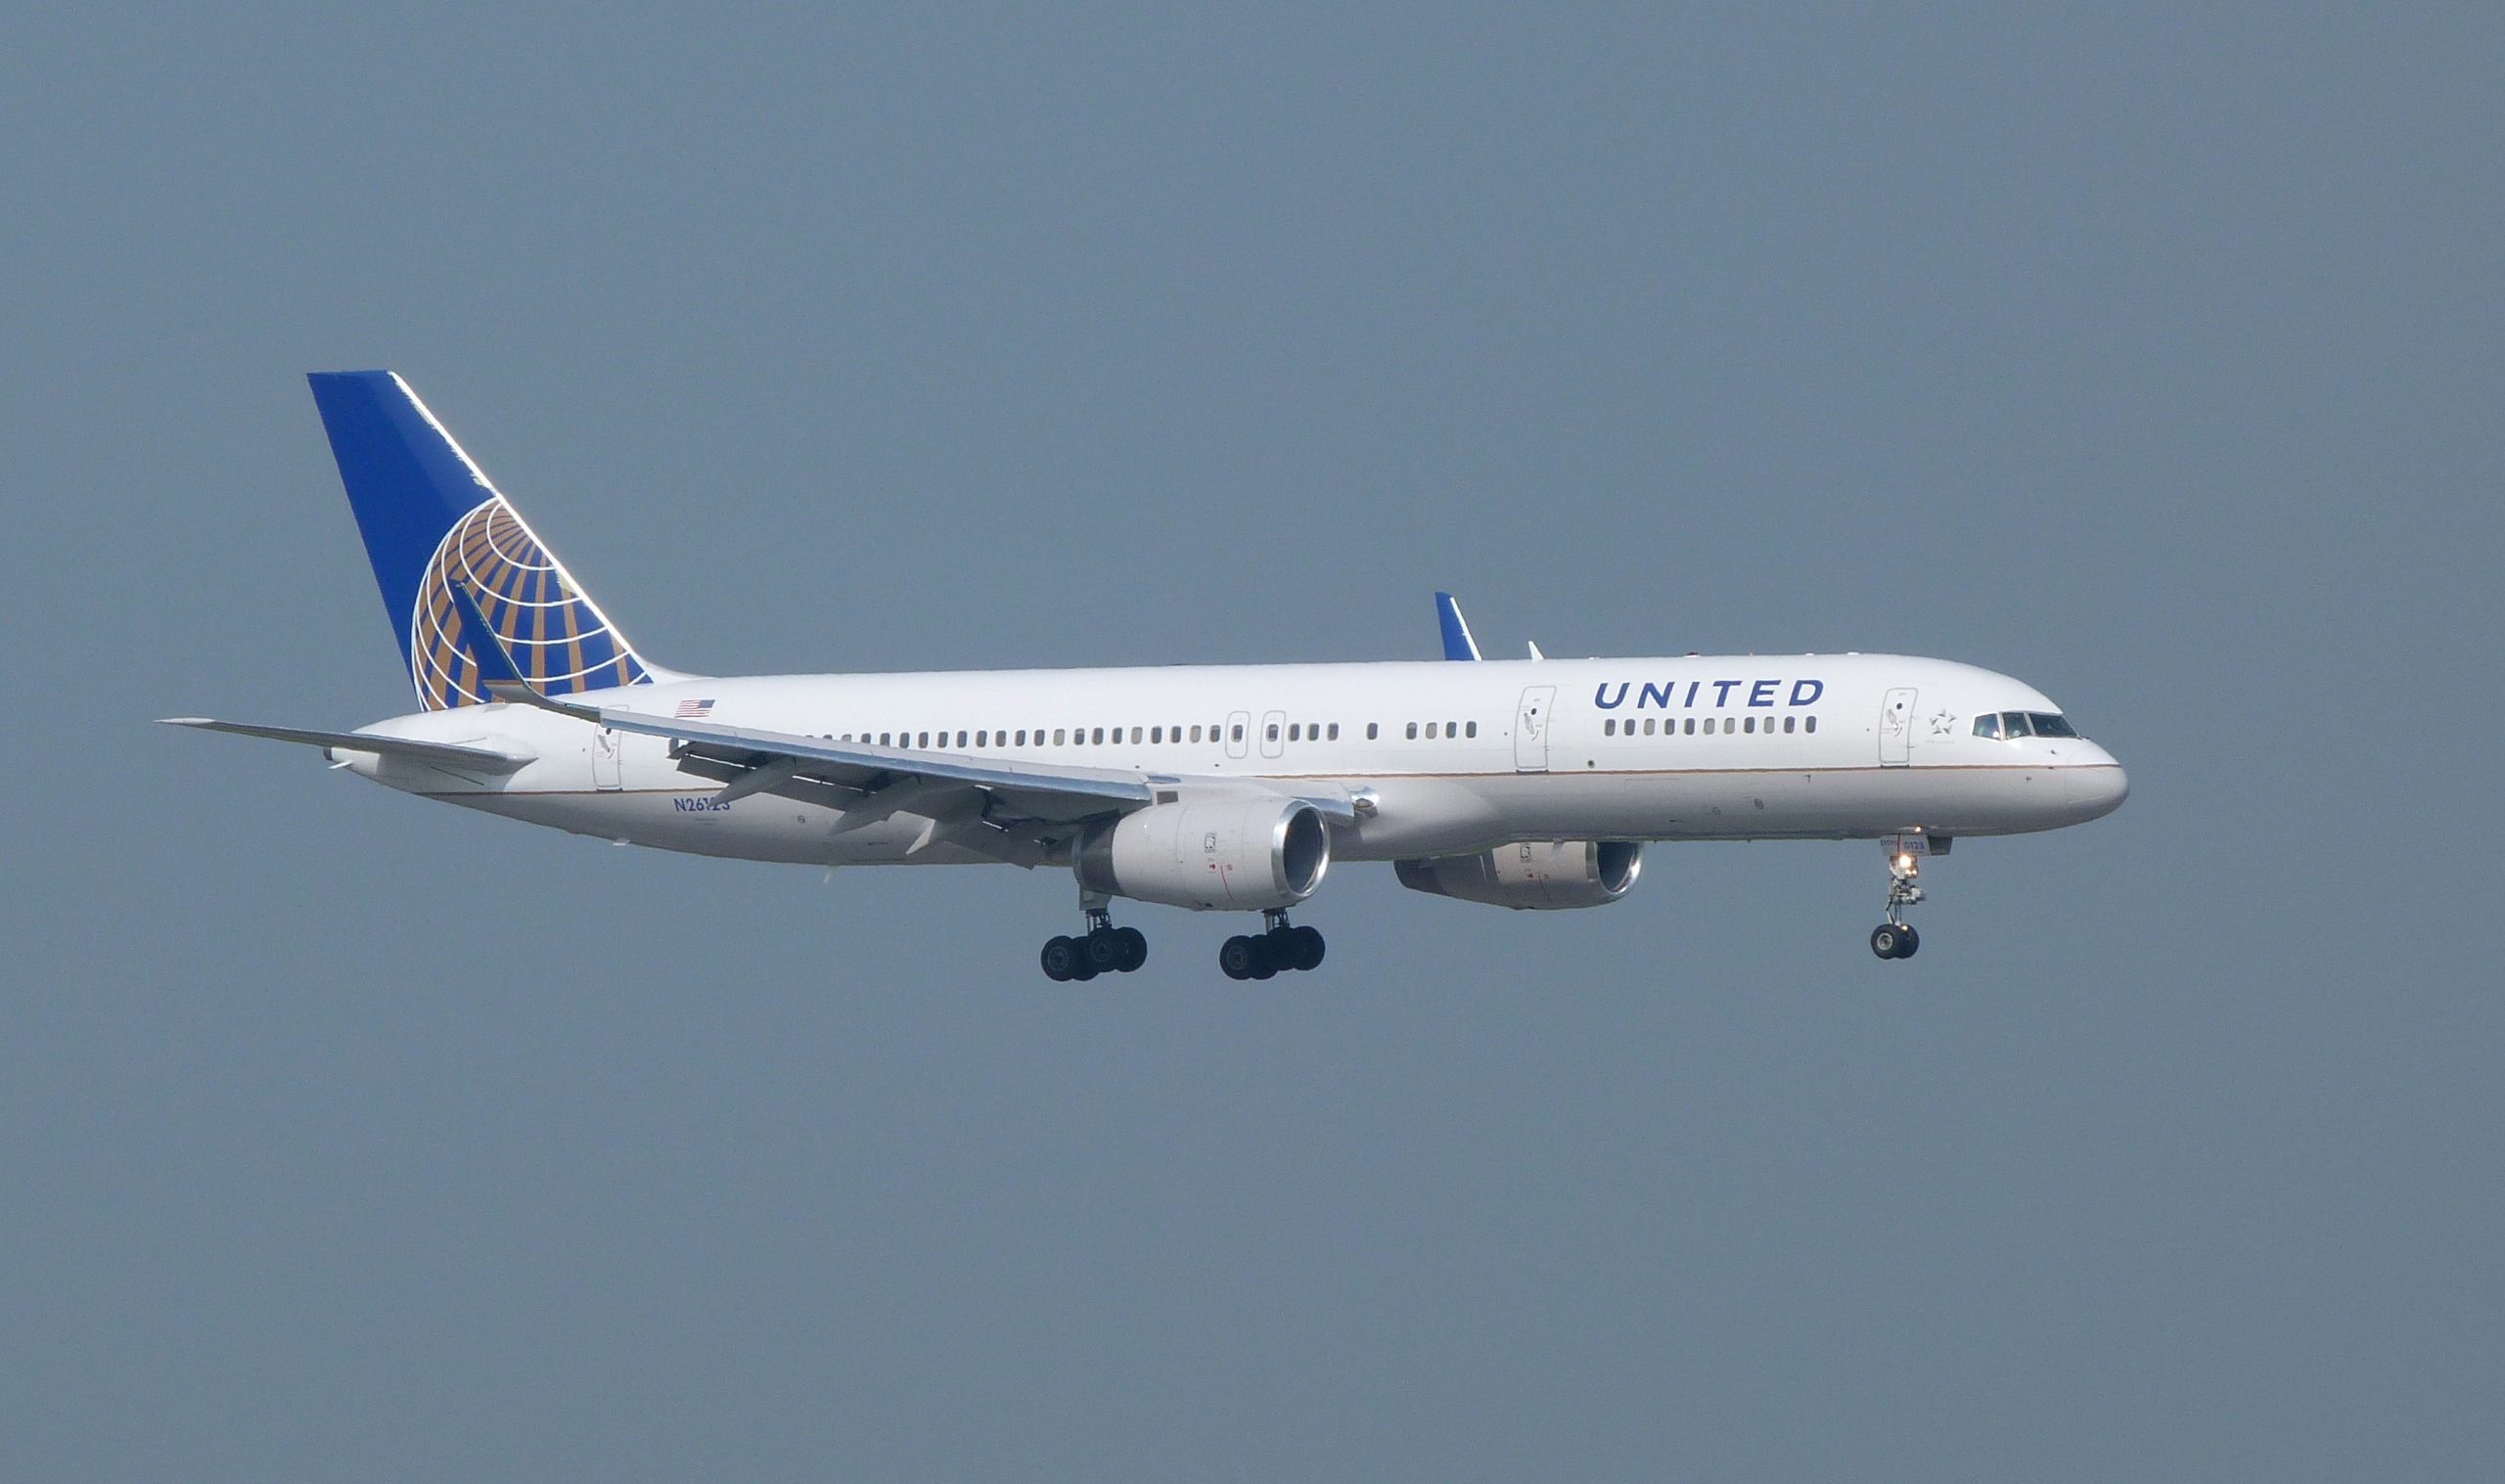 Malaga to New York flights take off this weekend: United Airlines starts direct route a month earlier due to popular demand [Video]